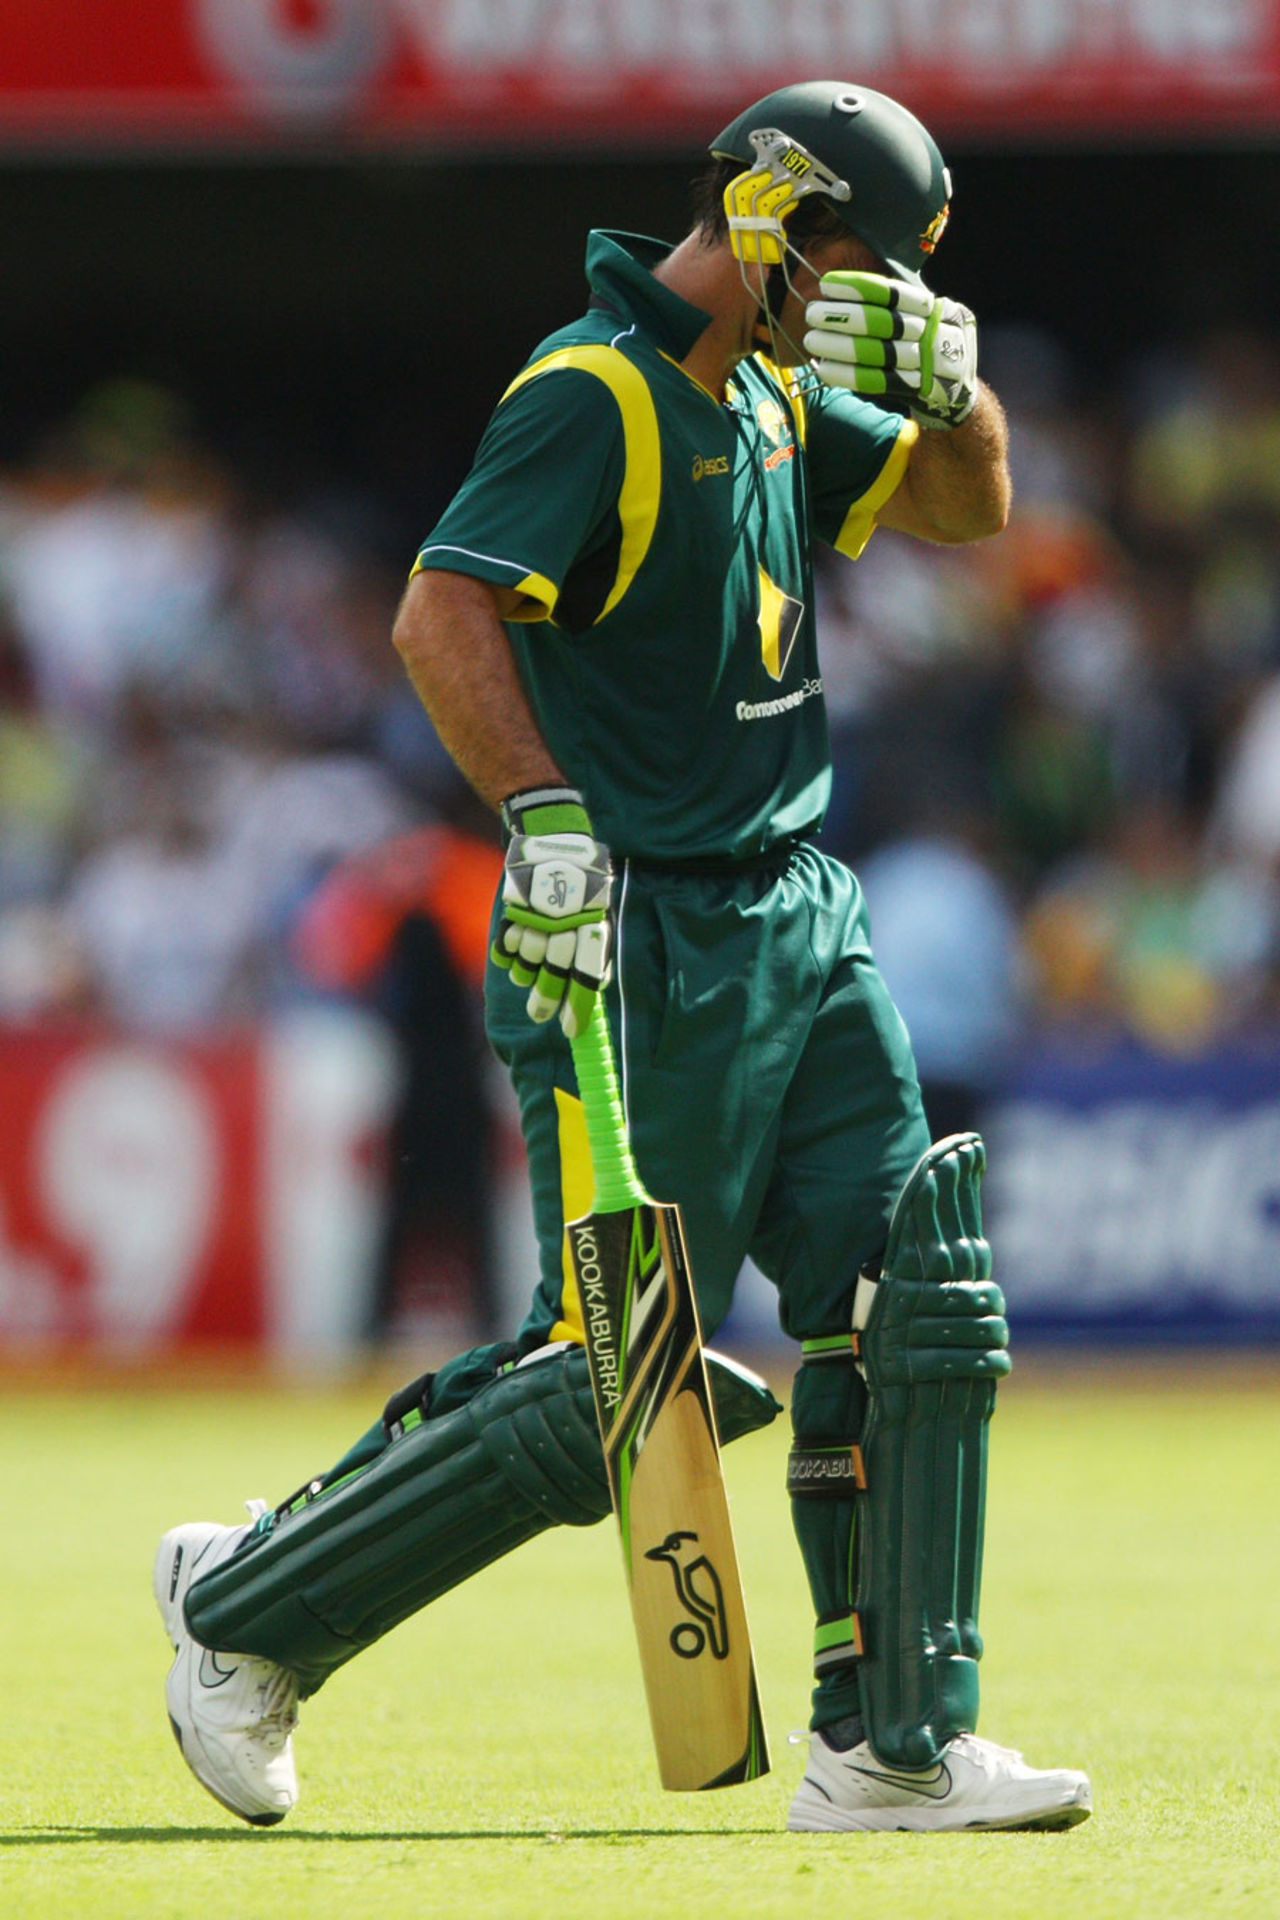 Ricky Ponting walks back after failing to reach 10 for the fifth successive innings, Australia v India, CB Series, Brisbane, February 19, 2012